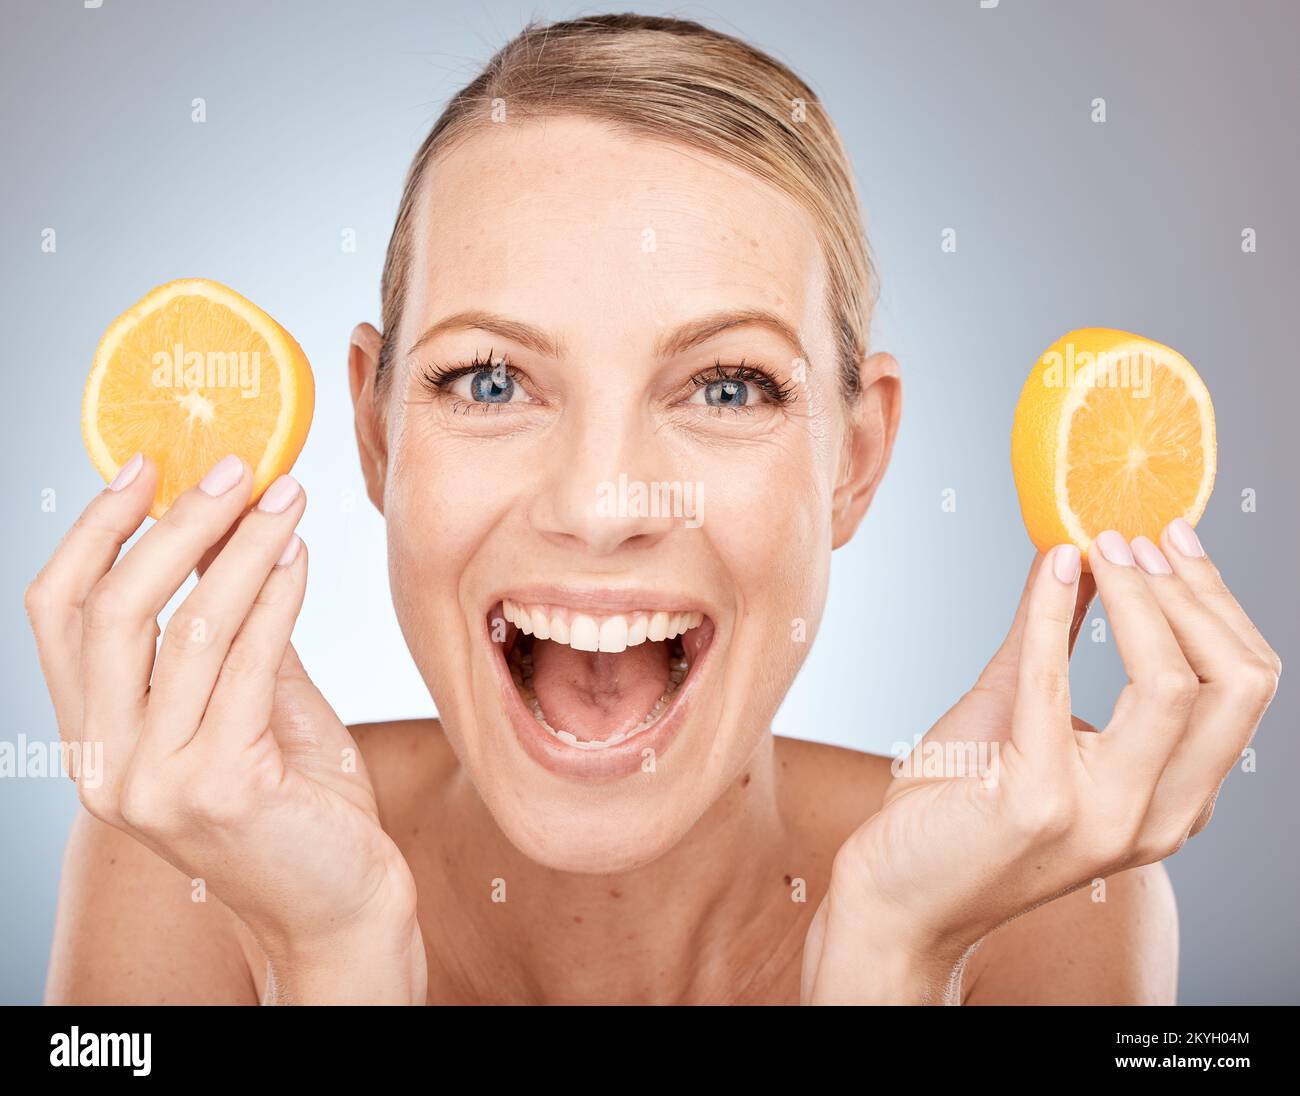 Detox skincare, beauty and face of woman with lemon for glowing skin hydration, body care or anti aging. Diy exfoliate, diet and model portrait with Stock Photo